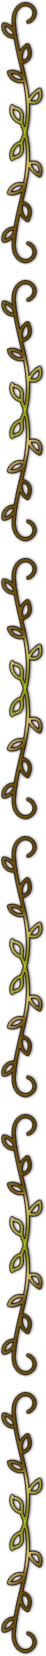 TiraNophi-SideVineDivider-Six.png